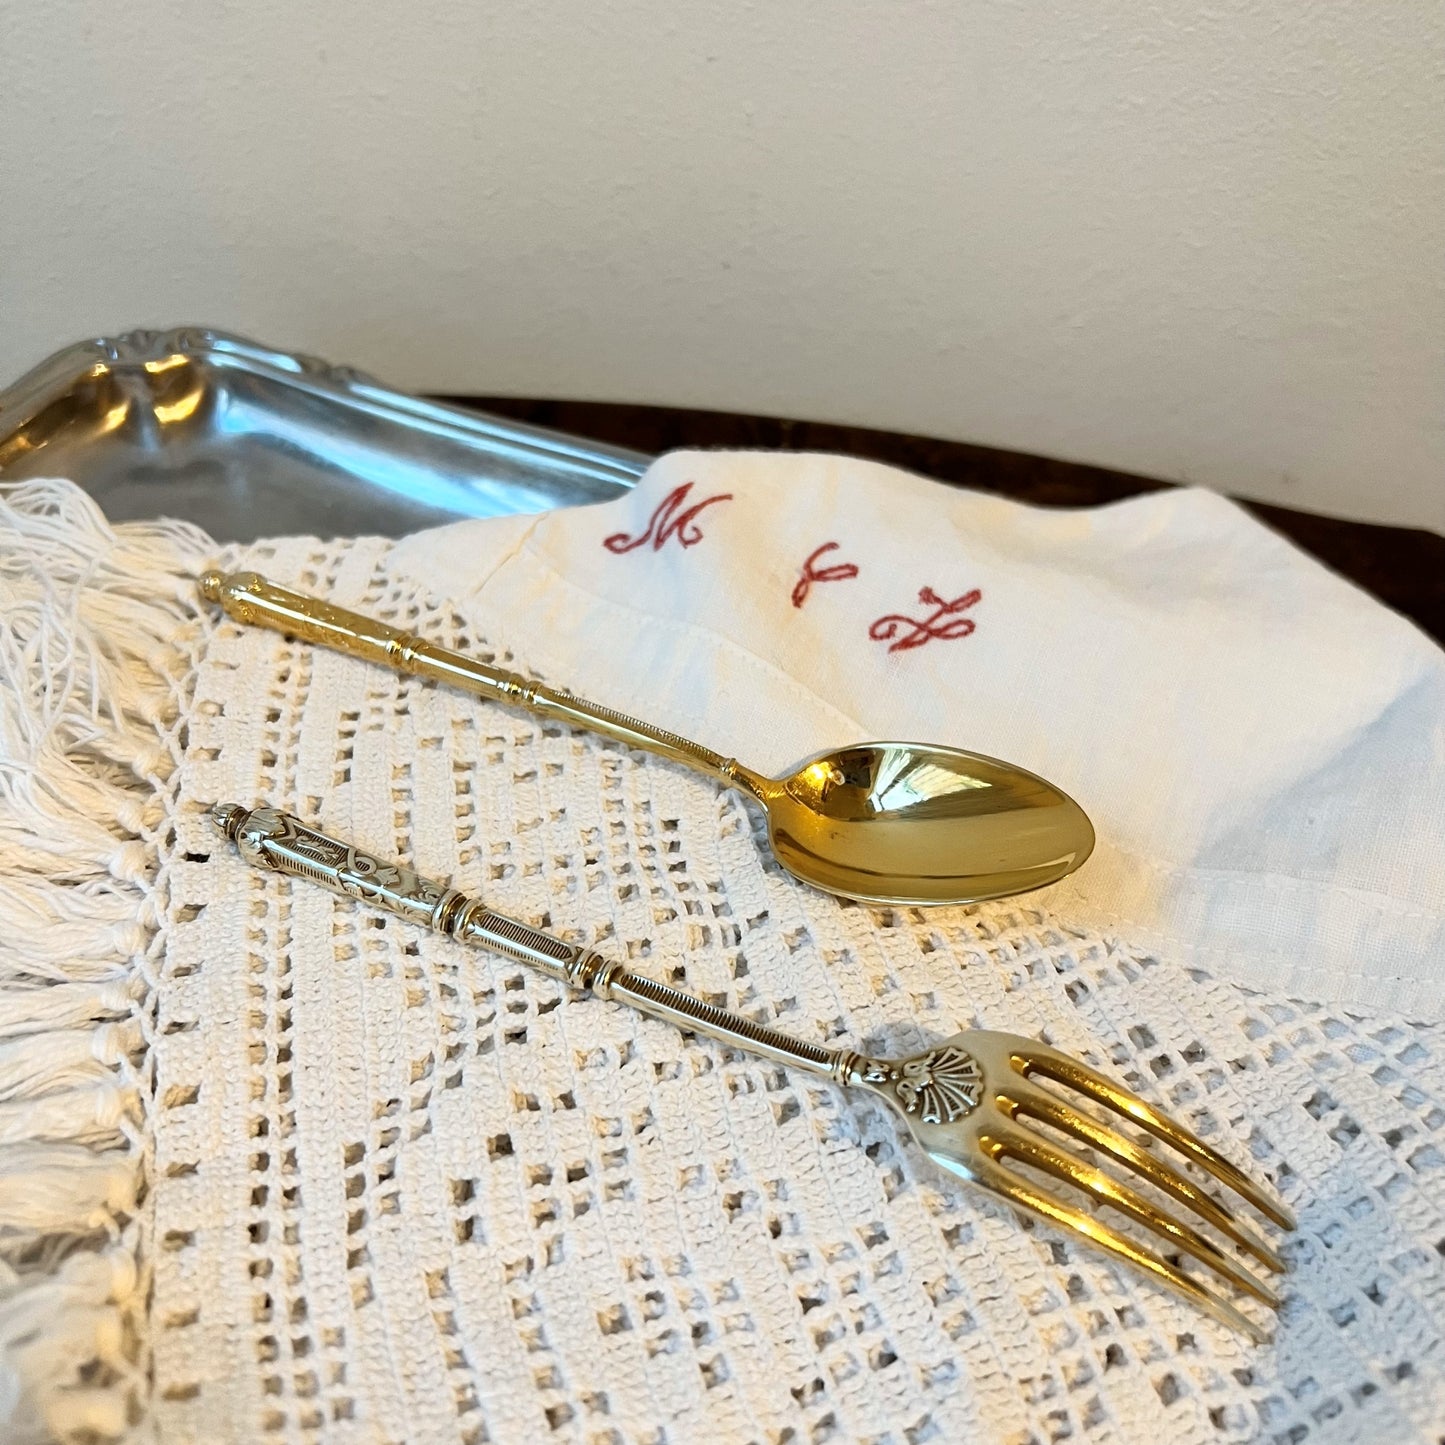 【Vintage】Belgium - 1950s Gold Plate Spoon and  Silver Plate Fork Set